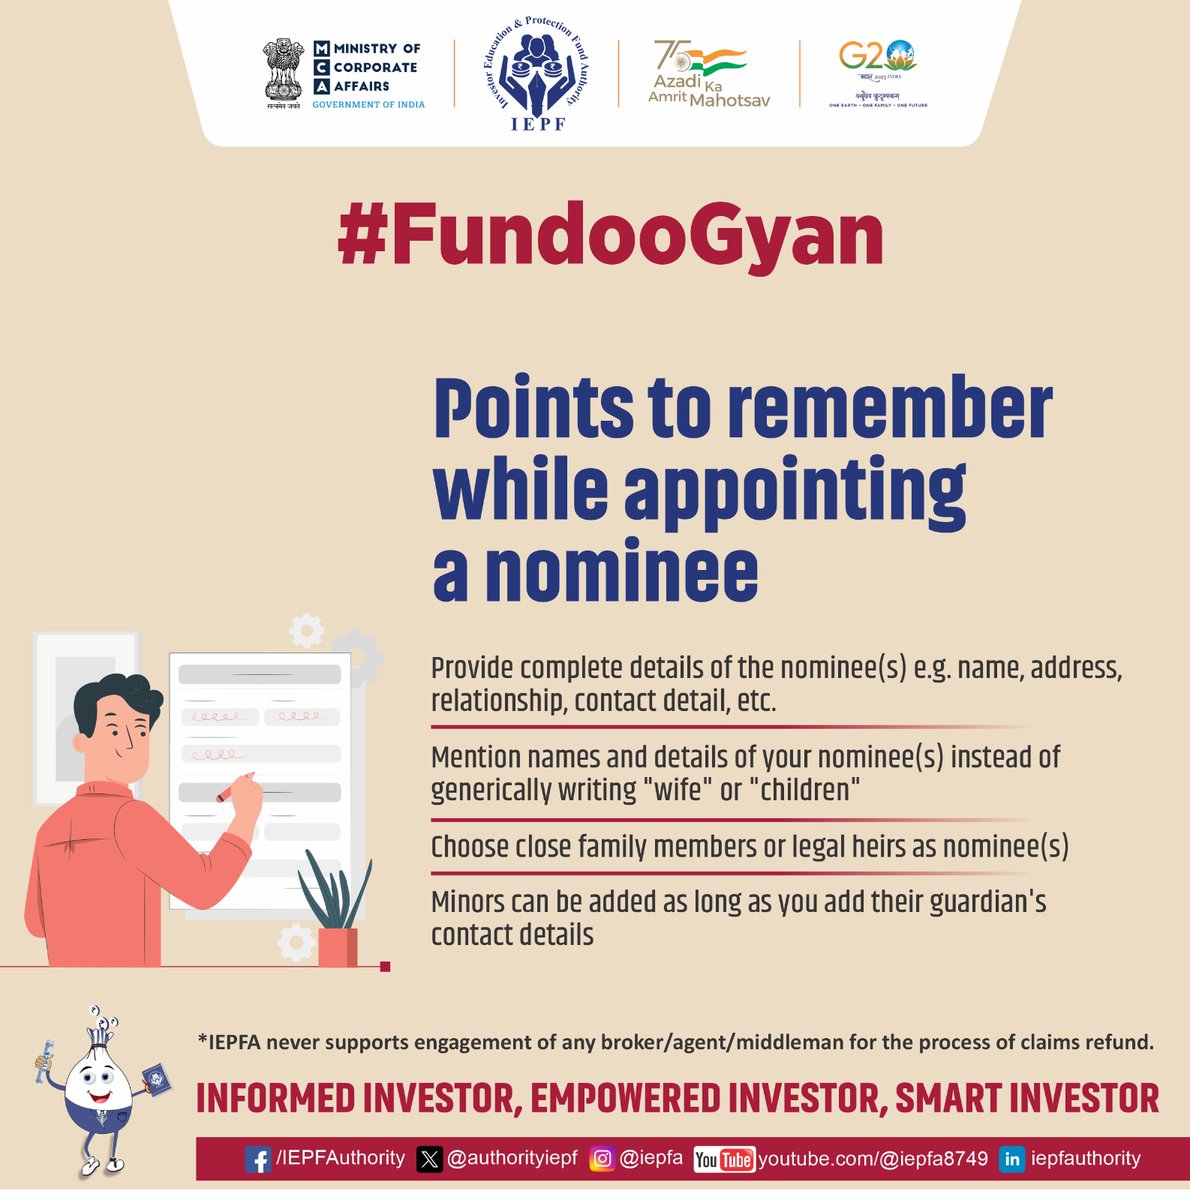 Ensure nominees for your #financialinstruments! Understand the importance of choosing a nominee for your investment with #IEPFA #Fundoo.

#FundooGyan #FinancialLiteracy #FinancialKnowledge